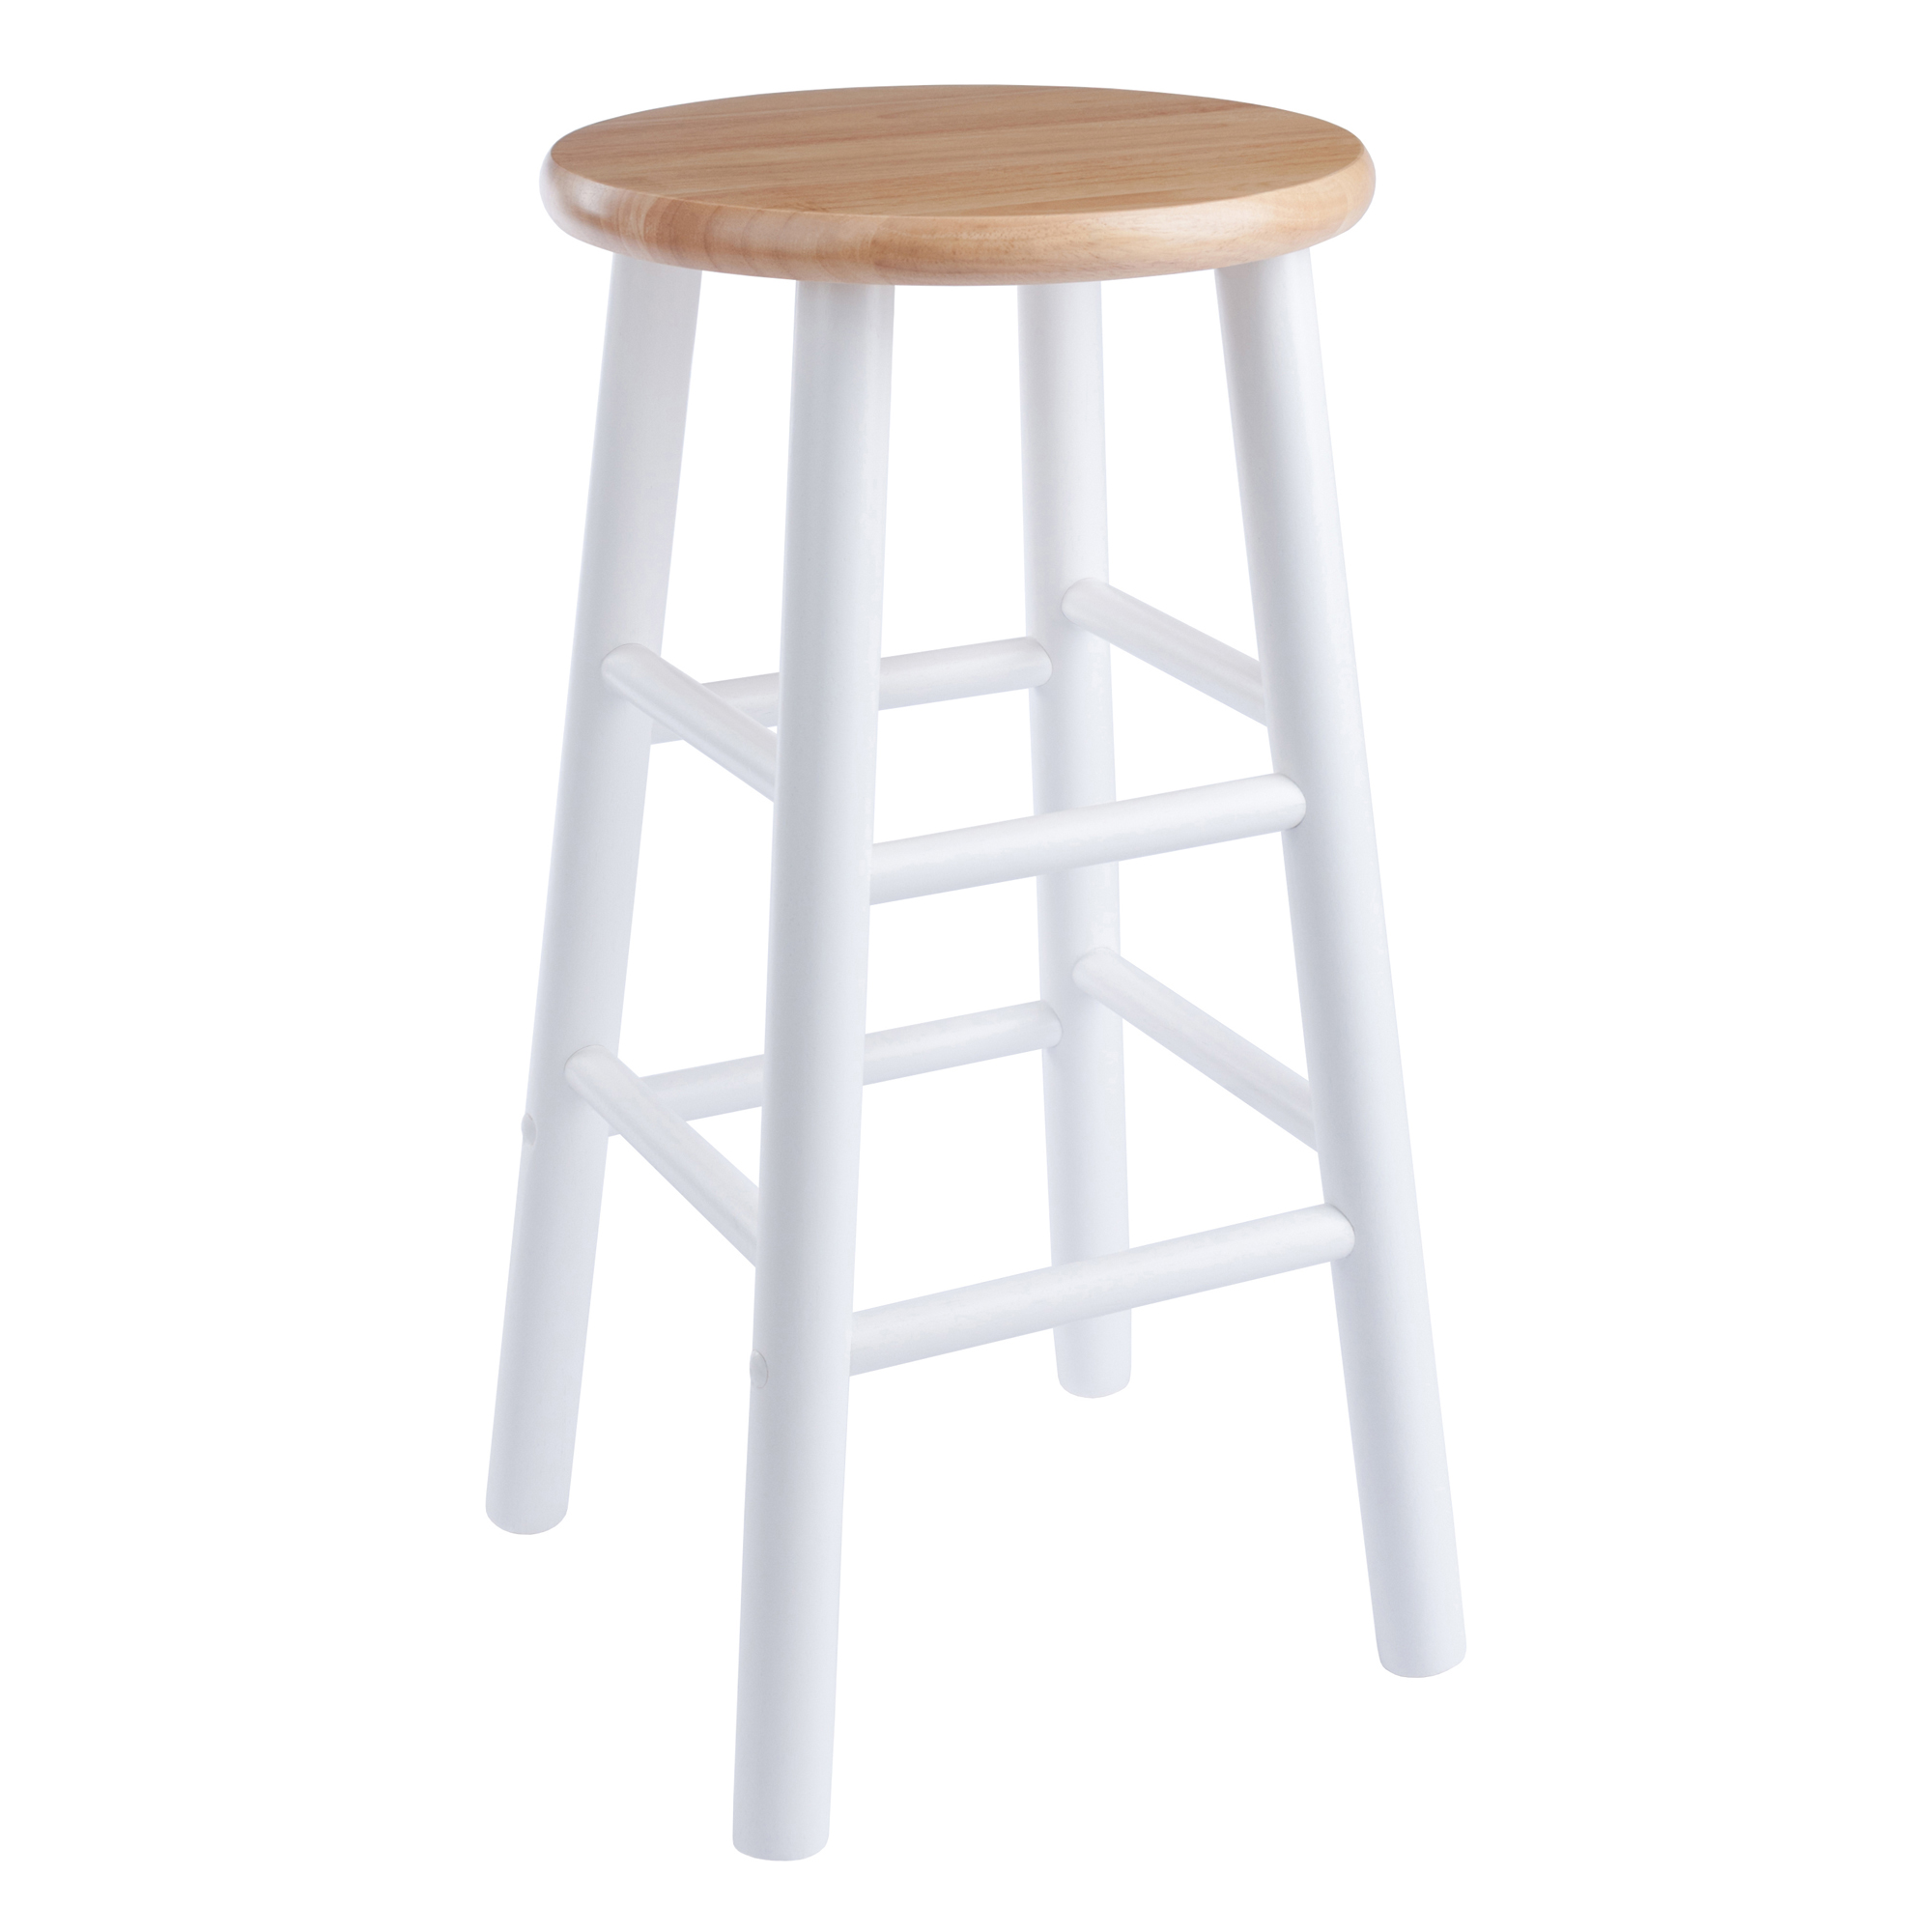 Winsome Wood Huxton 2-Piece Counter Stools, Natural & White Finish - image 3 of 10